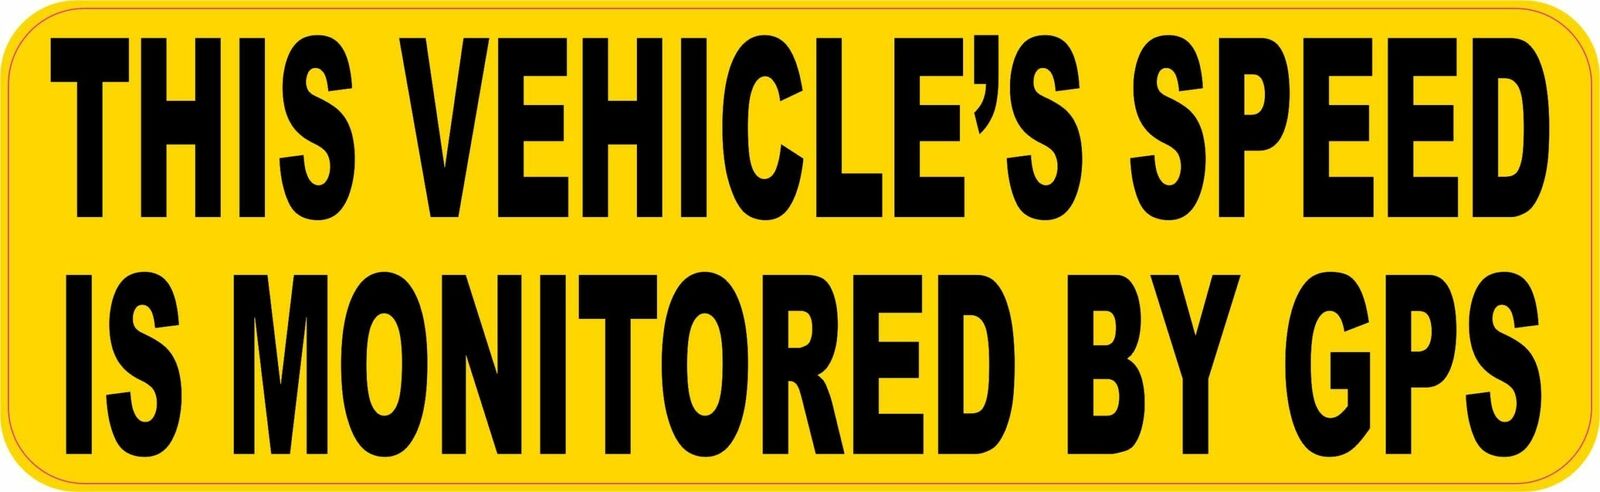 10in x 3in This Vehicles Speed Monitored by GPS Vinyl Sticker Car Bumper Decal